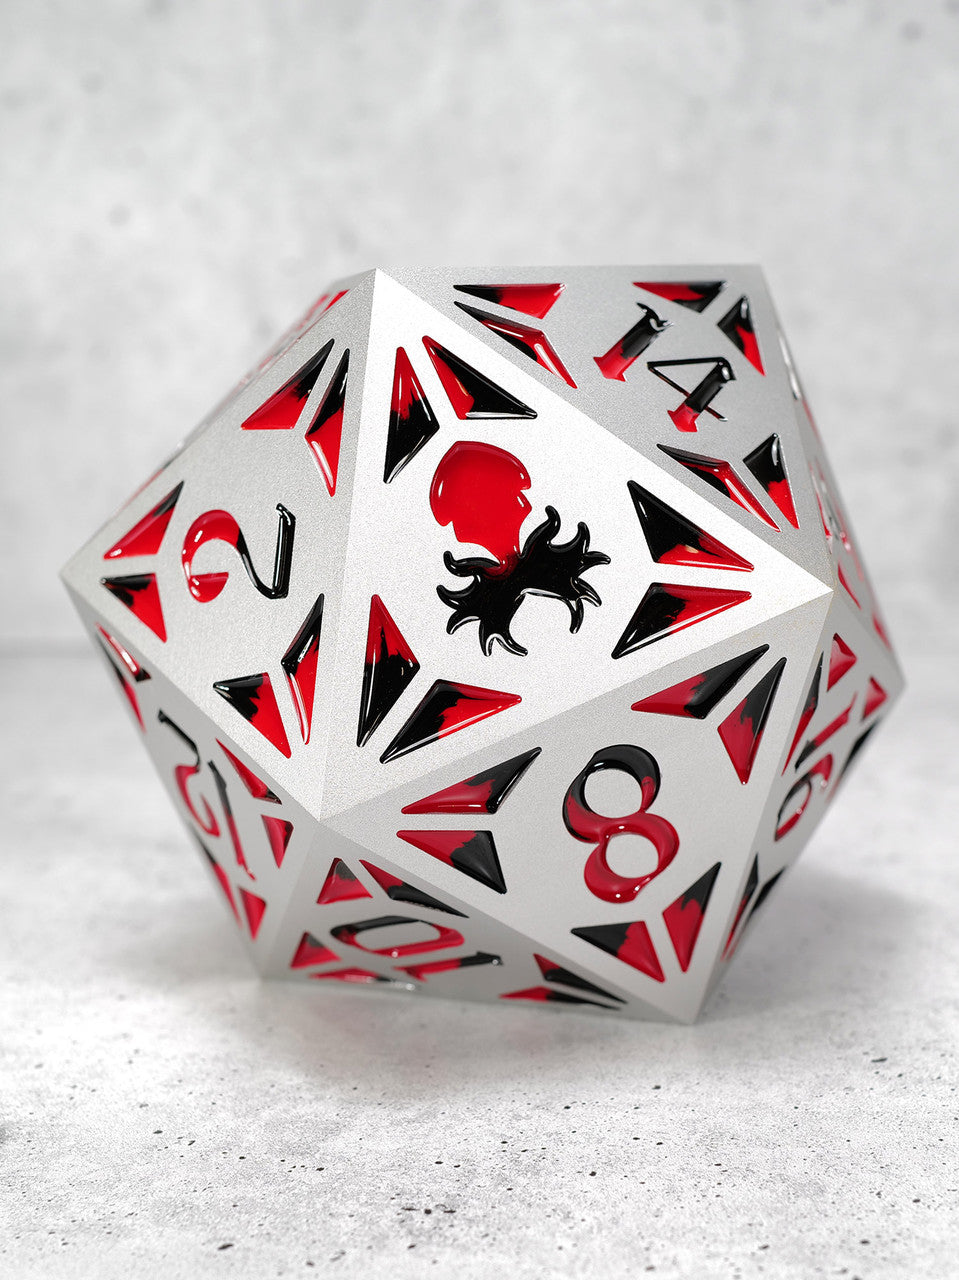 Leviathan Revival Solid Aluminum D20 inked in Red & Black